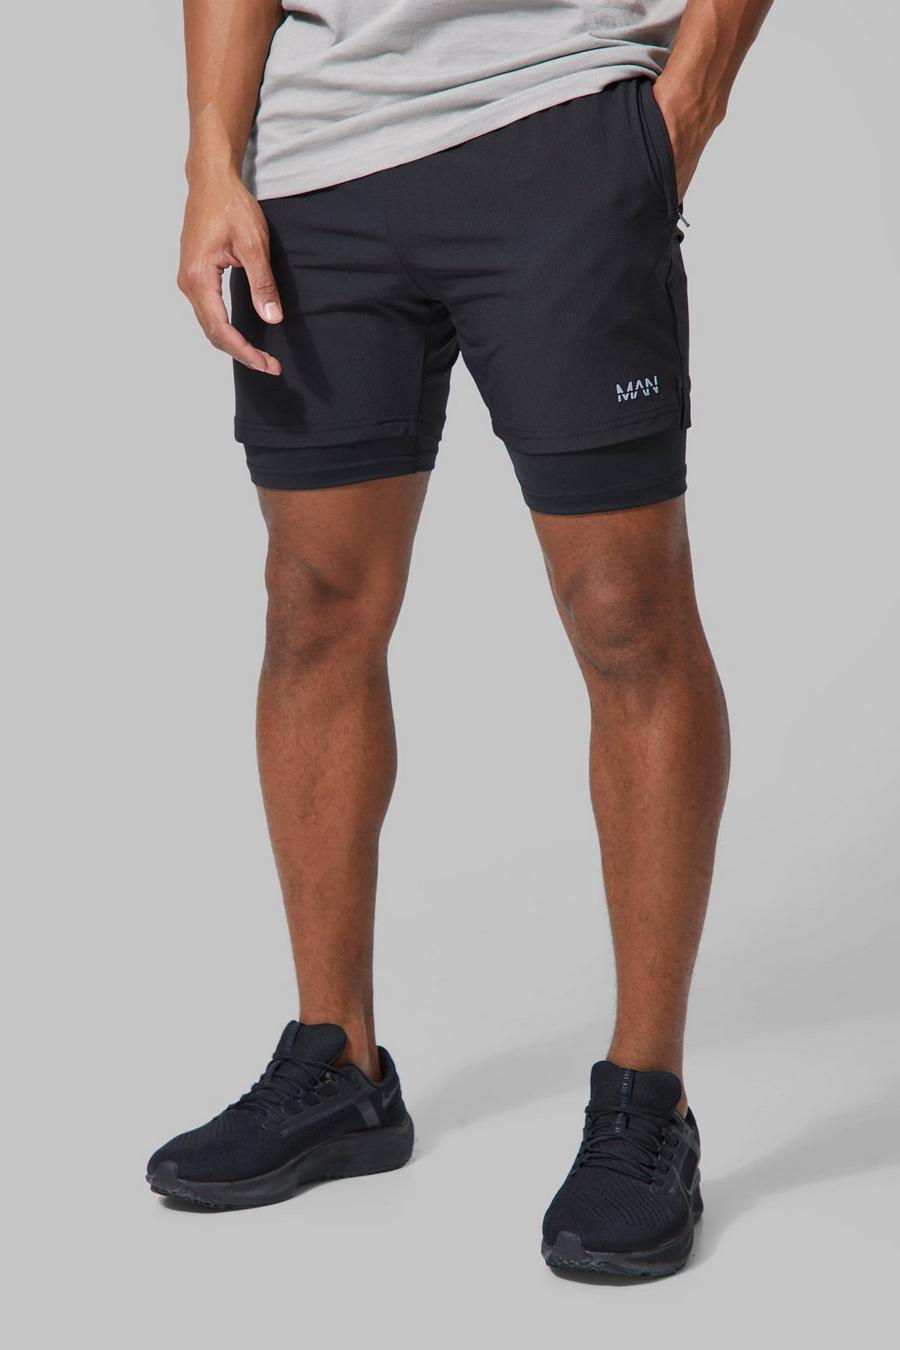 Black Man Active 2-In-1 Fitness Shorts